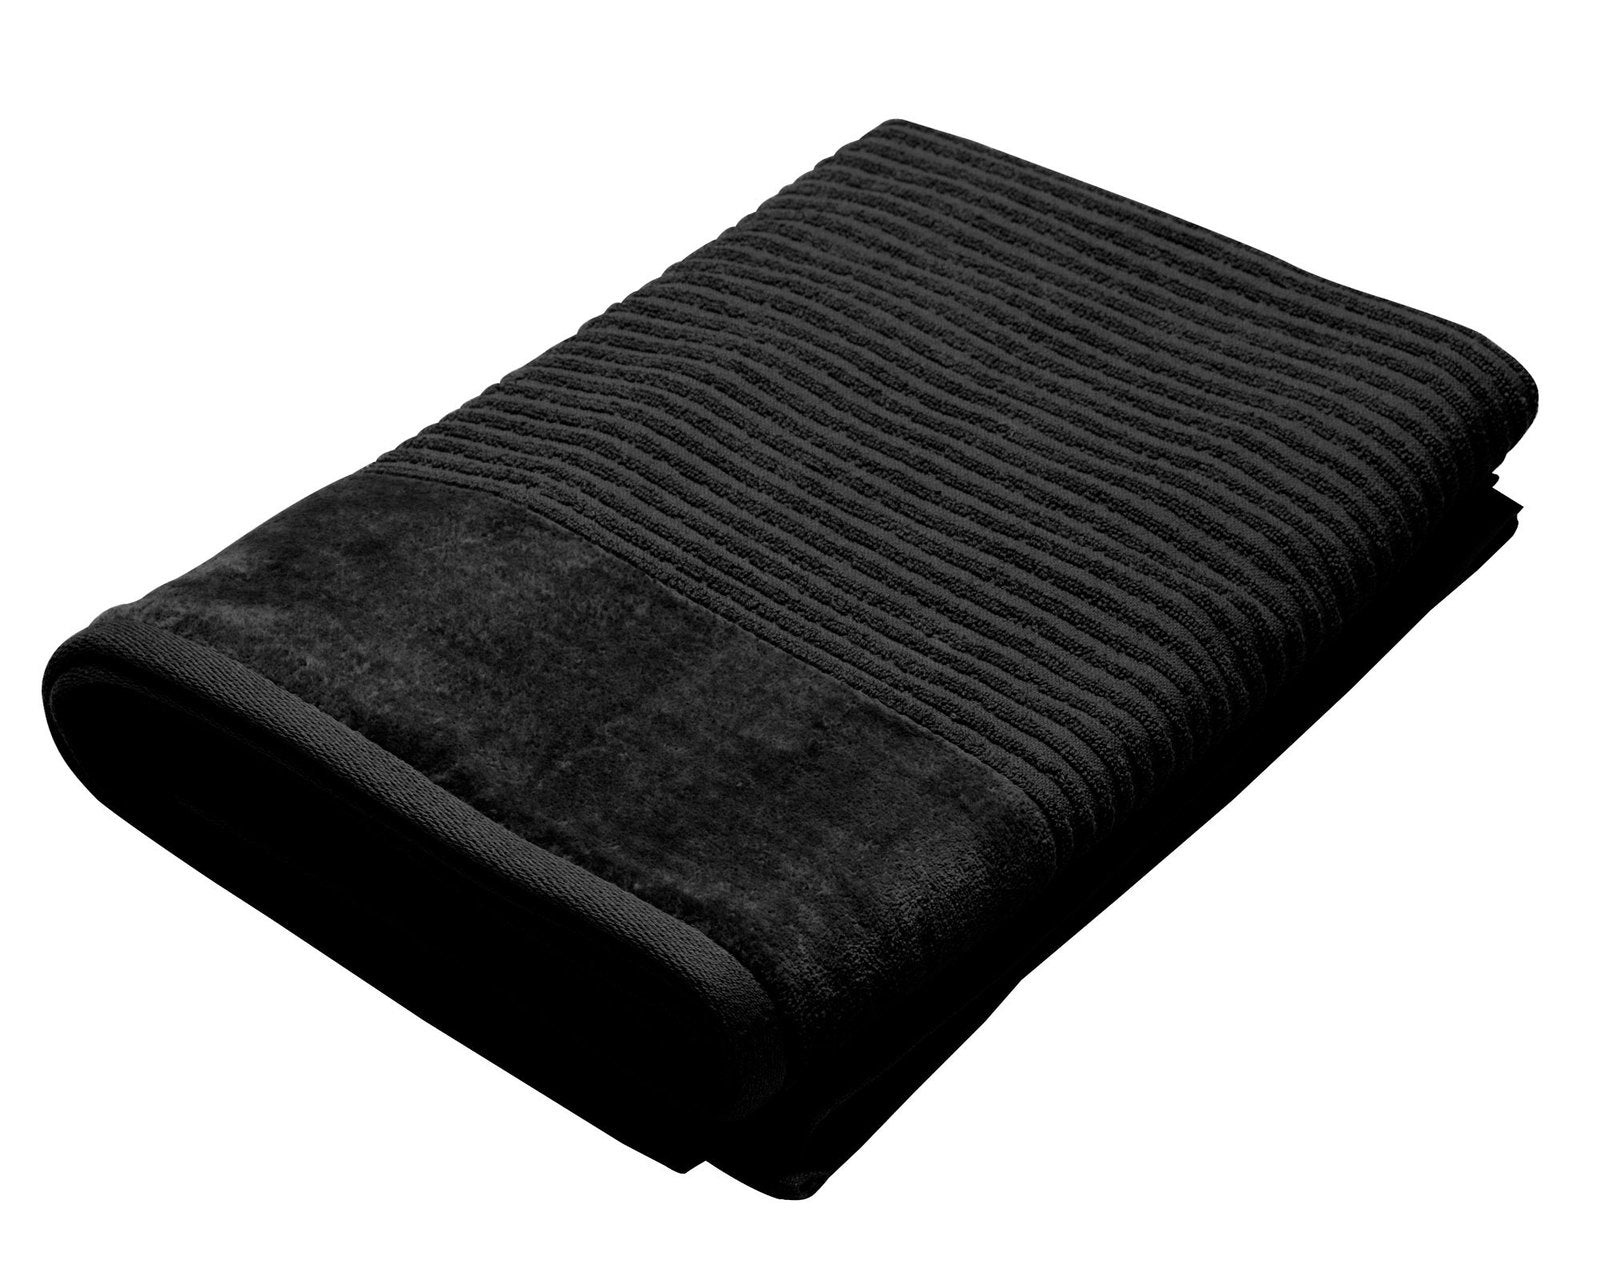 Jenny Mclean Royal Excellency Bath Towel 2 ply sheared Border 600GSM in Black